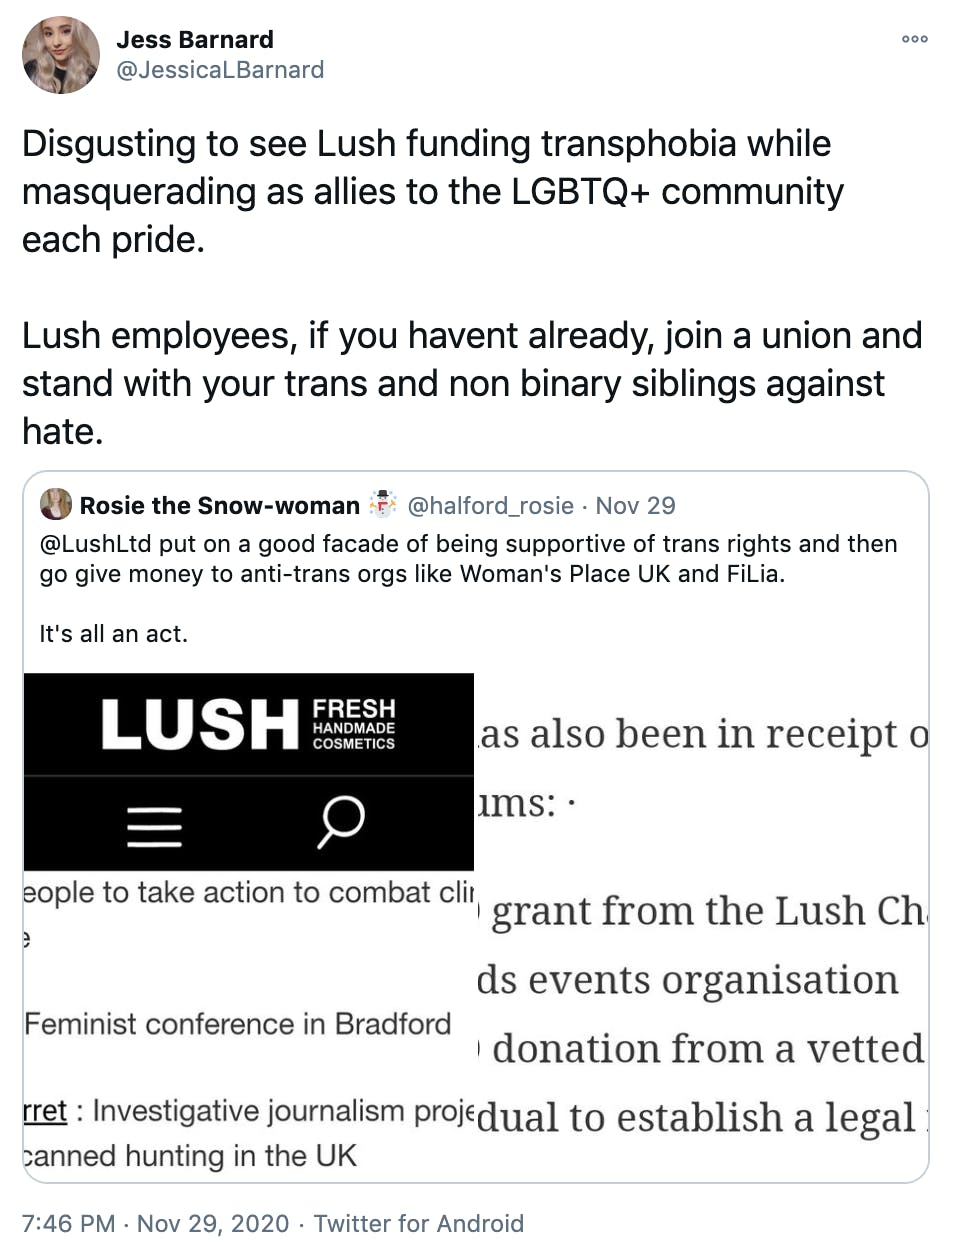 Disgusting to see Lush funding transphobia while masquerading as allies to the LGBTQ+ community each pride. Lush employees, if you havent already, join a union and stand with your trans and non binary siblings against hate.